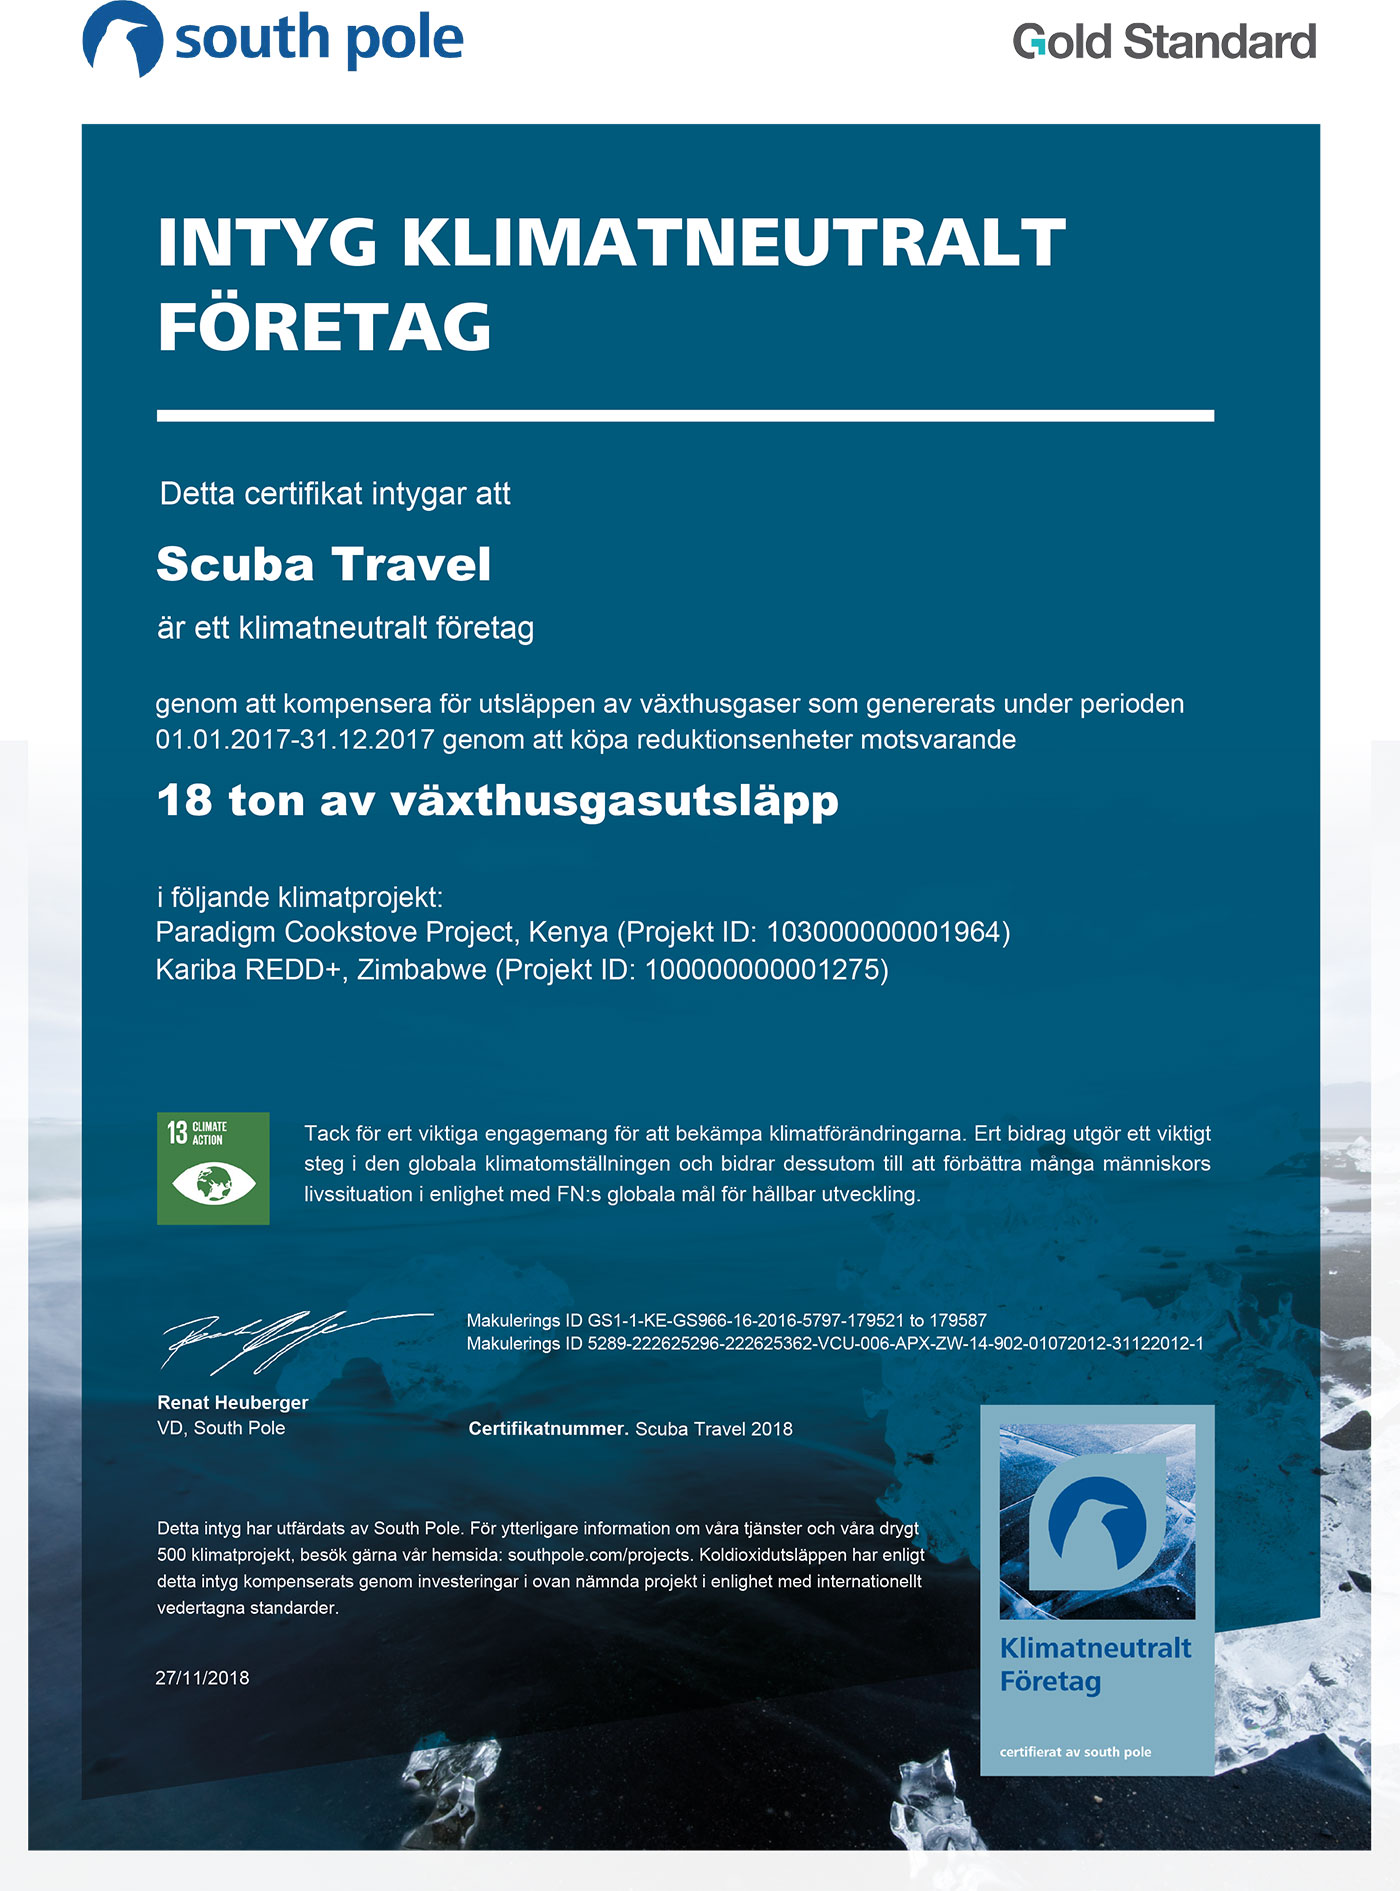 South-pole-climate-certificate-2018